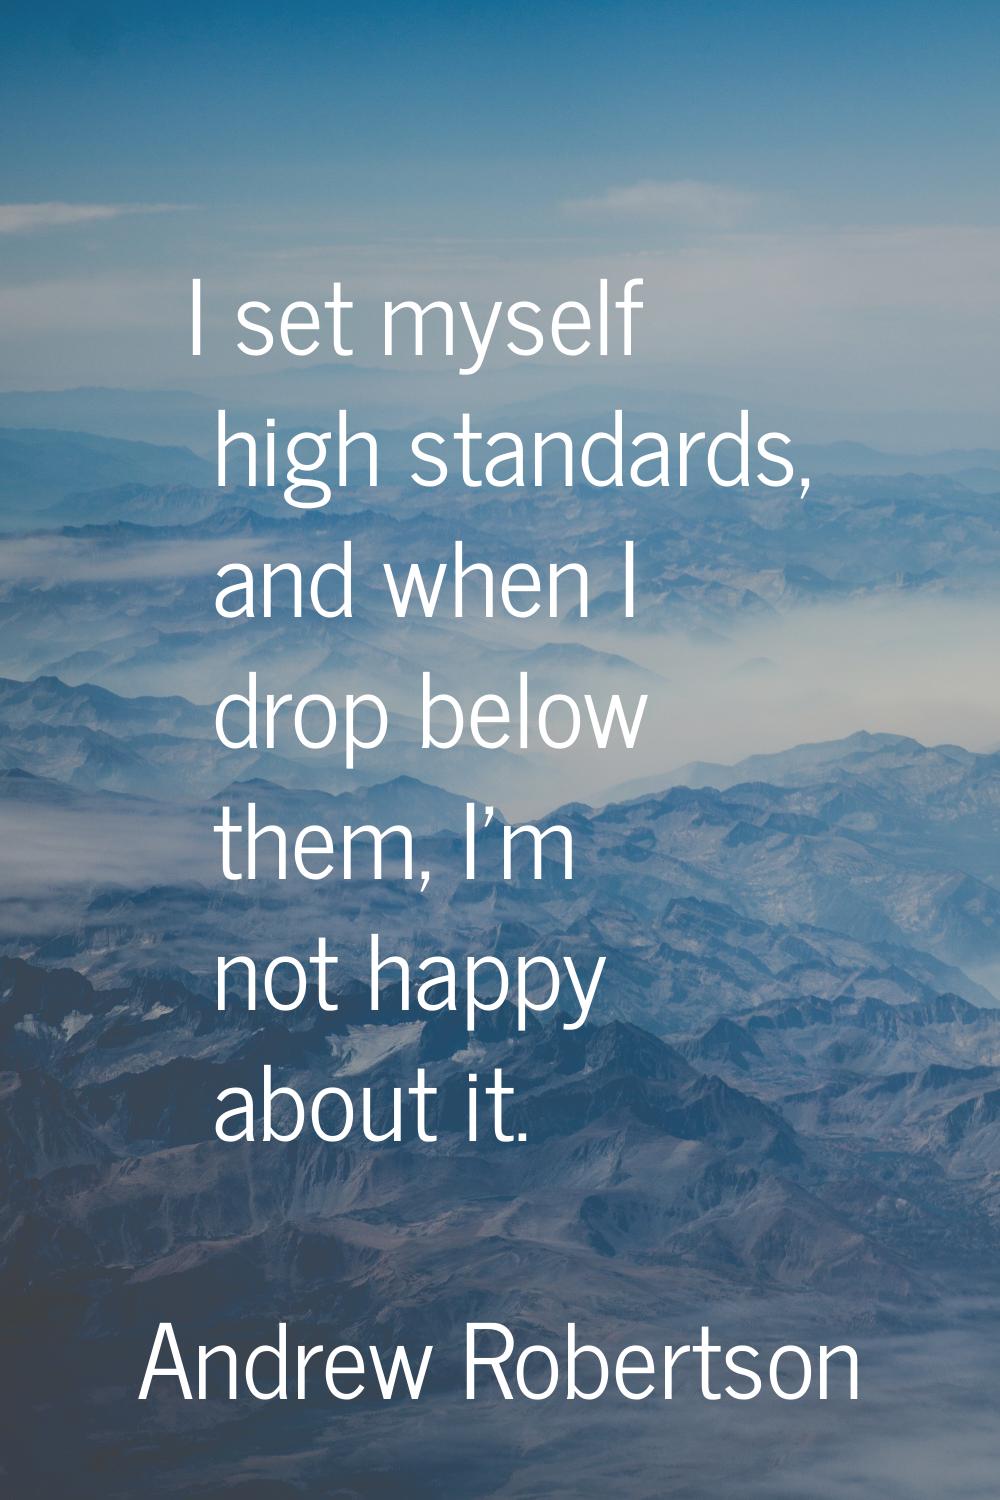 I set myself high standards, and when I drop below them, I'm not happy about it.